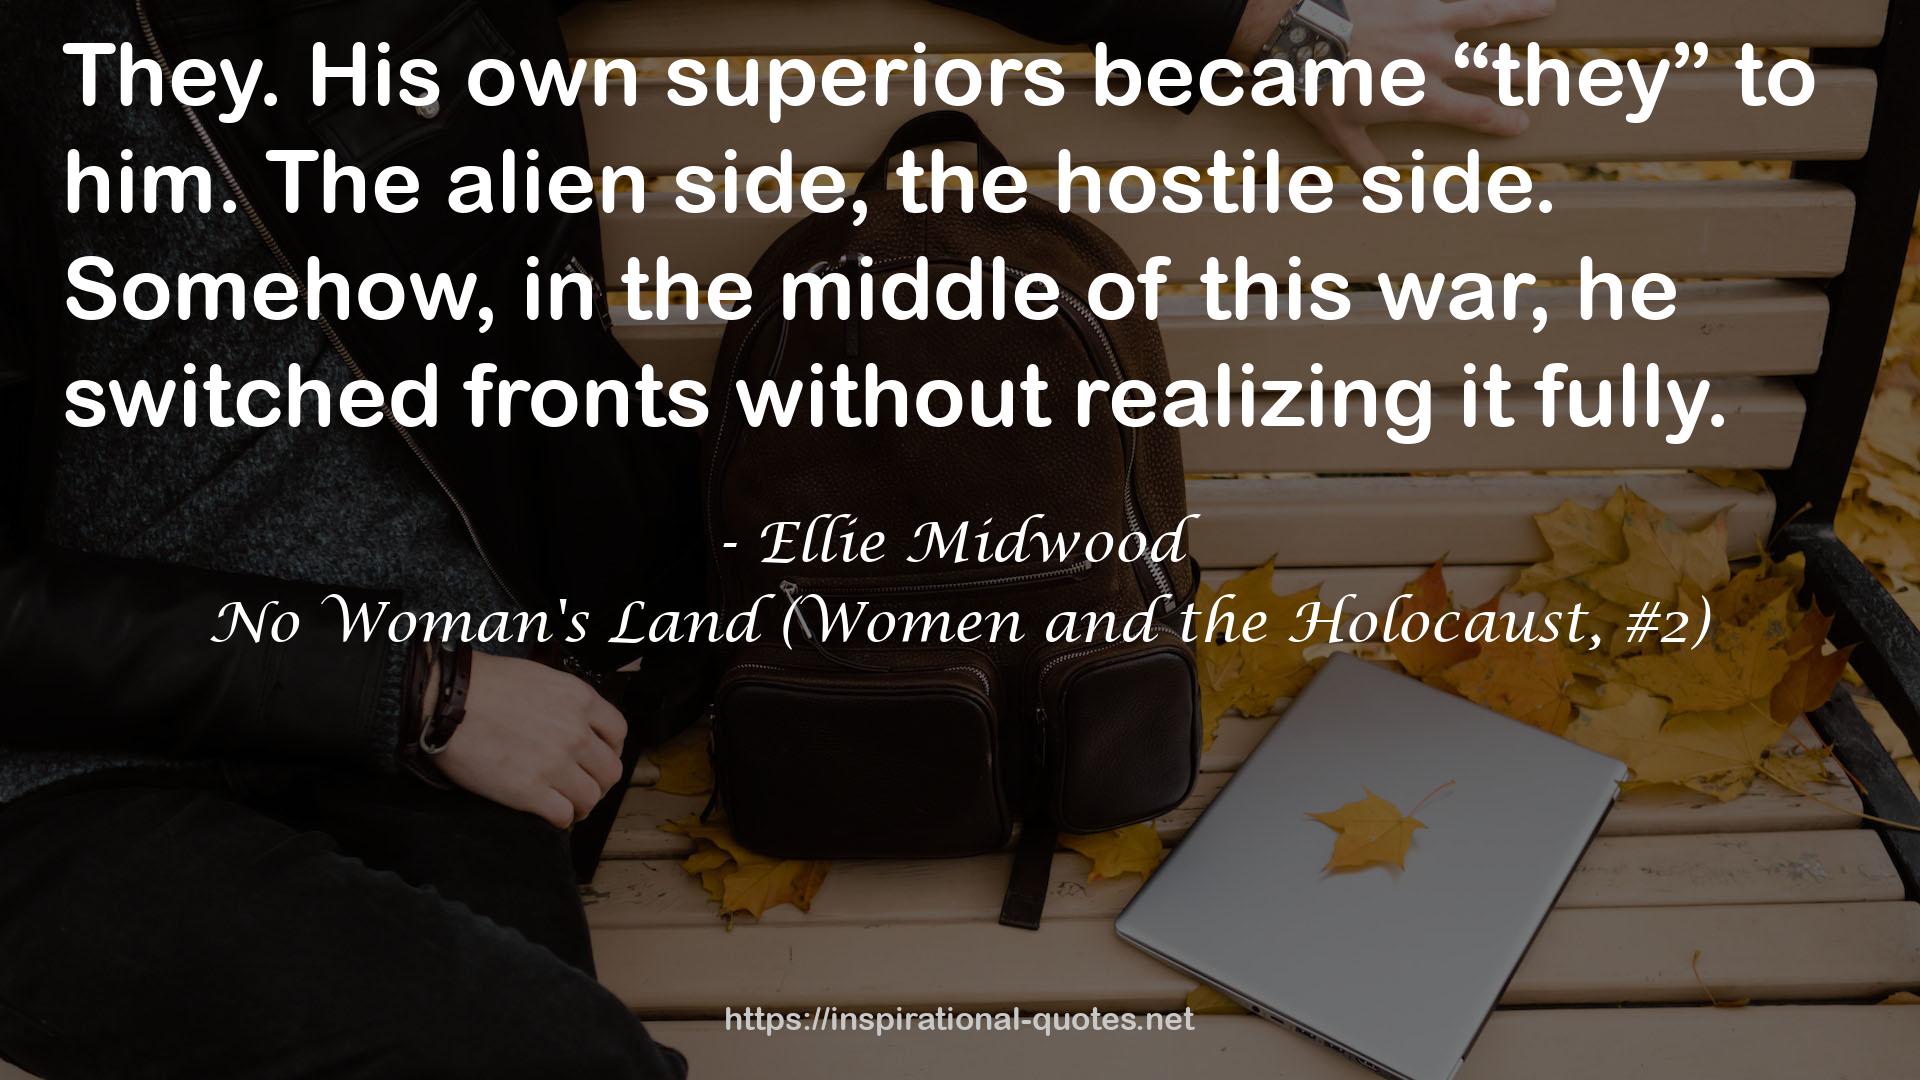 No Woman's Land (Women and the Holocaust, #2) QUOTES